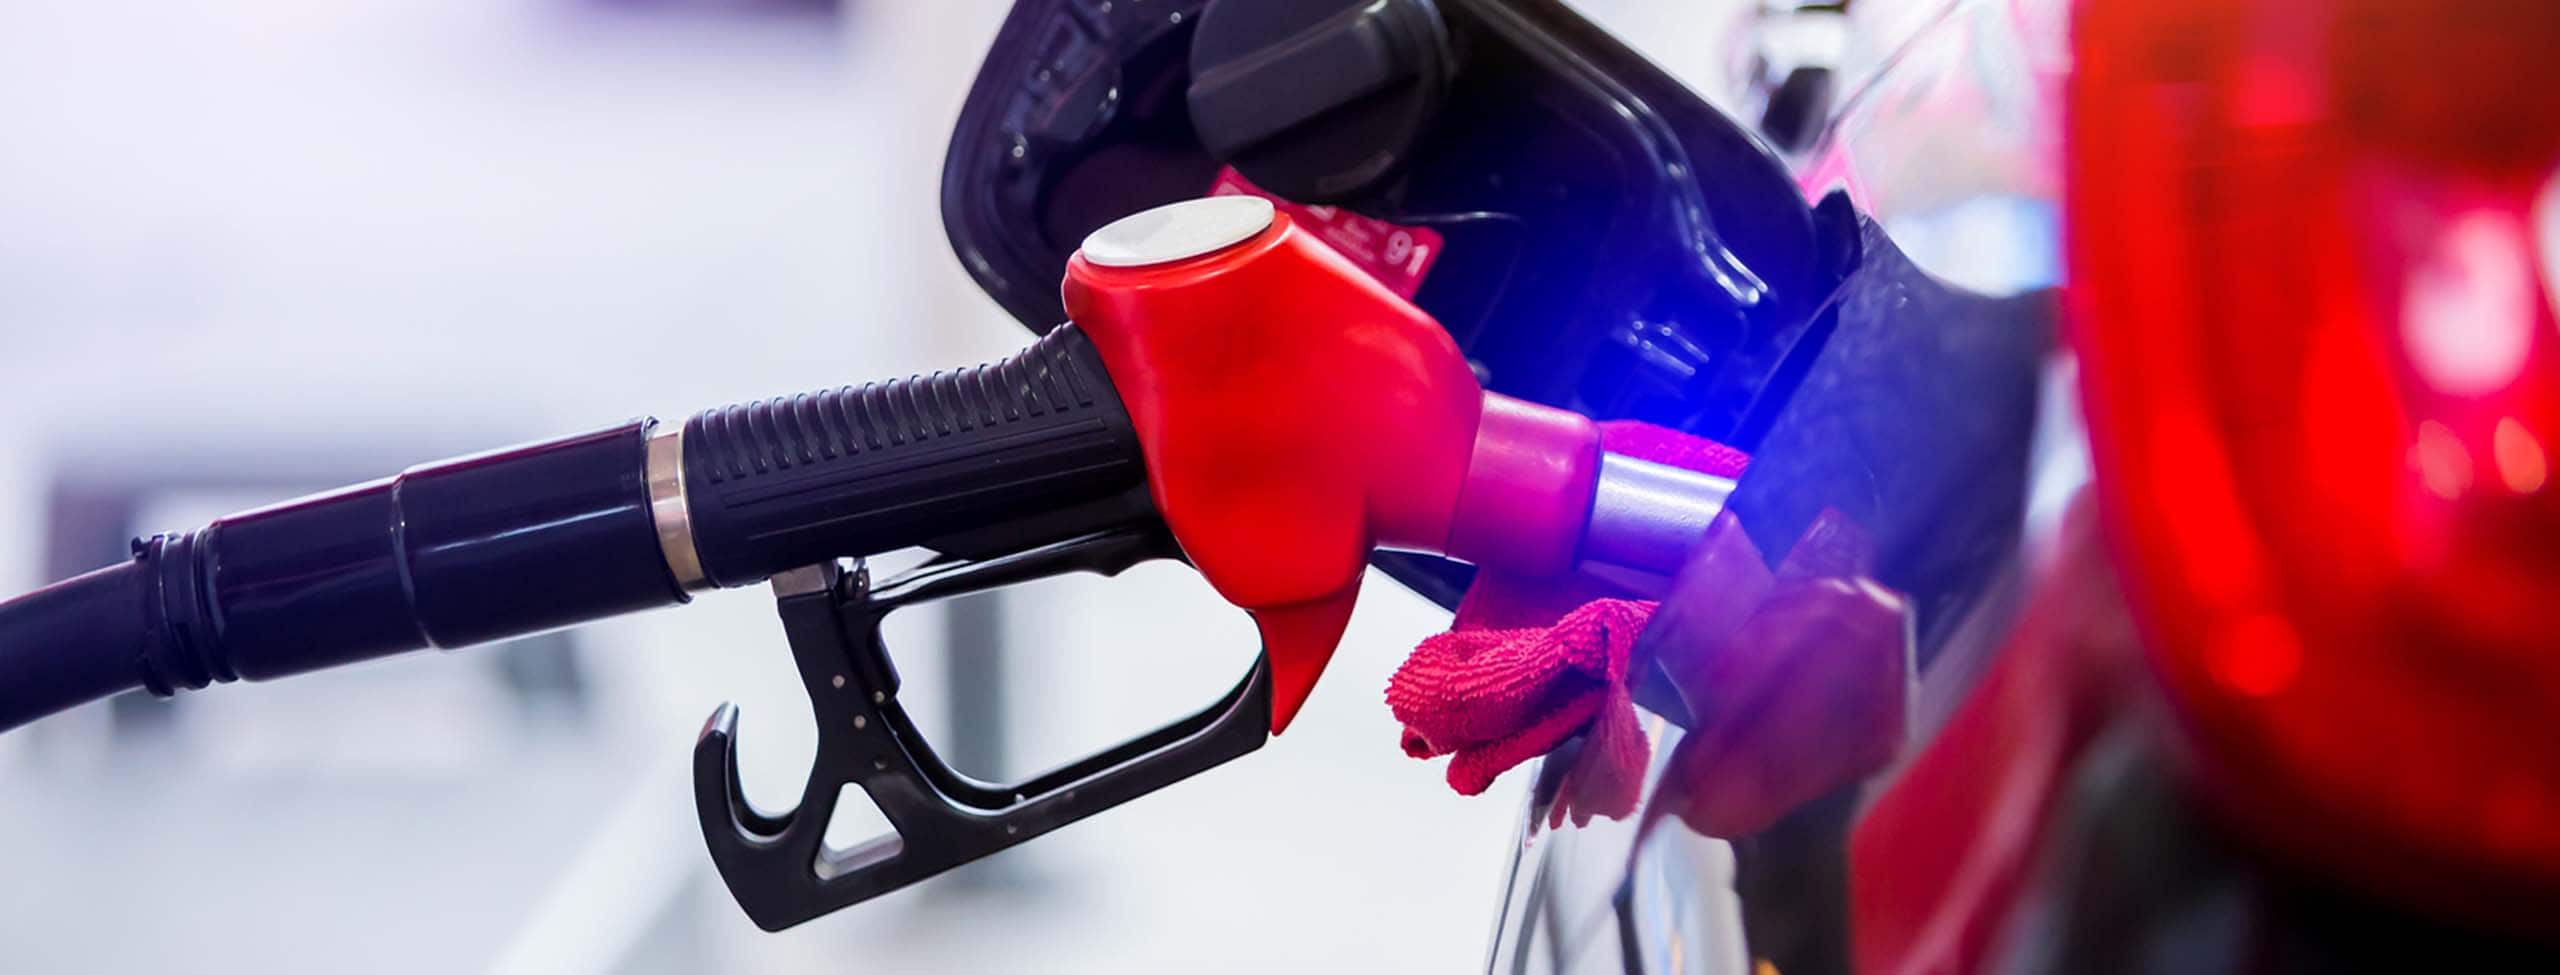 Red_Gas_Pump_Refilling_At_Gas_Station_S_2308-X3